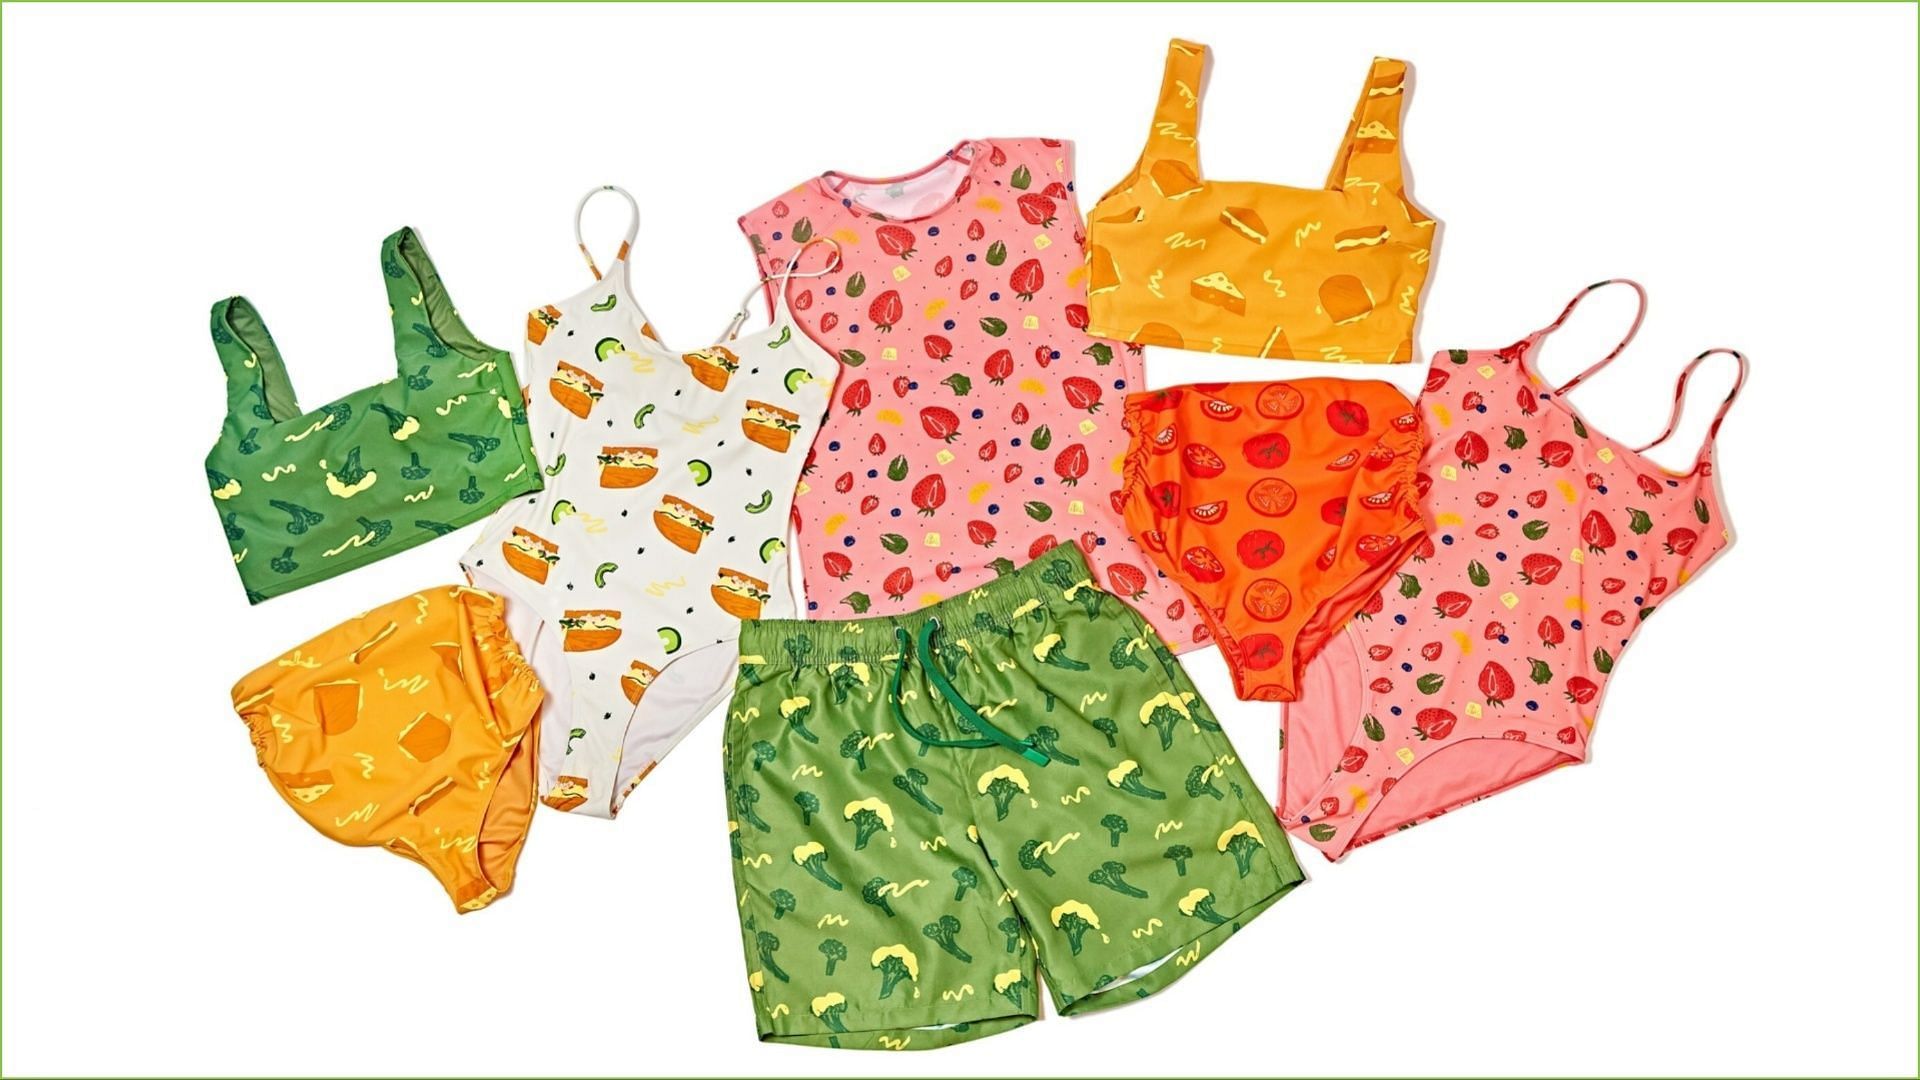 Fans can choose from a wide range of swimwear to mix and match for the perfect summer style (Image via P. Bread)